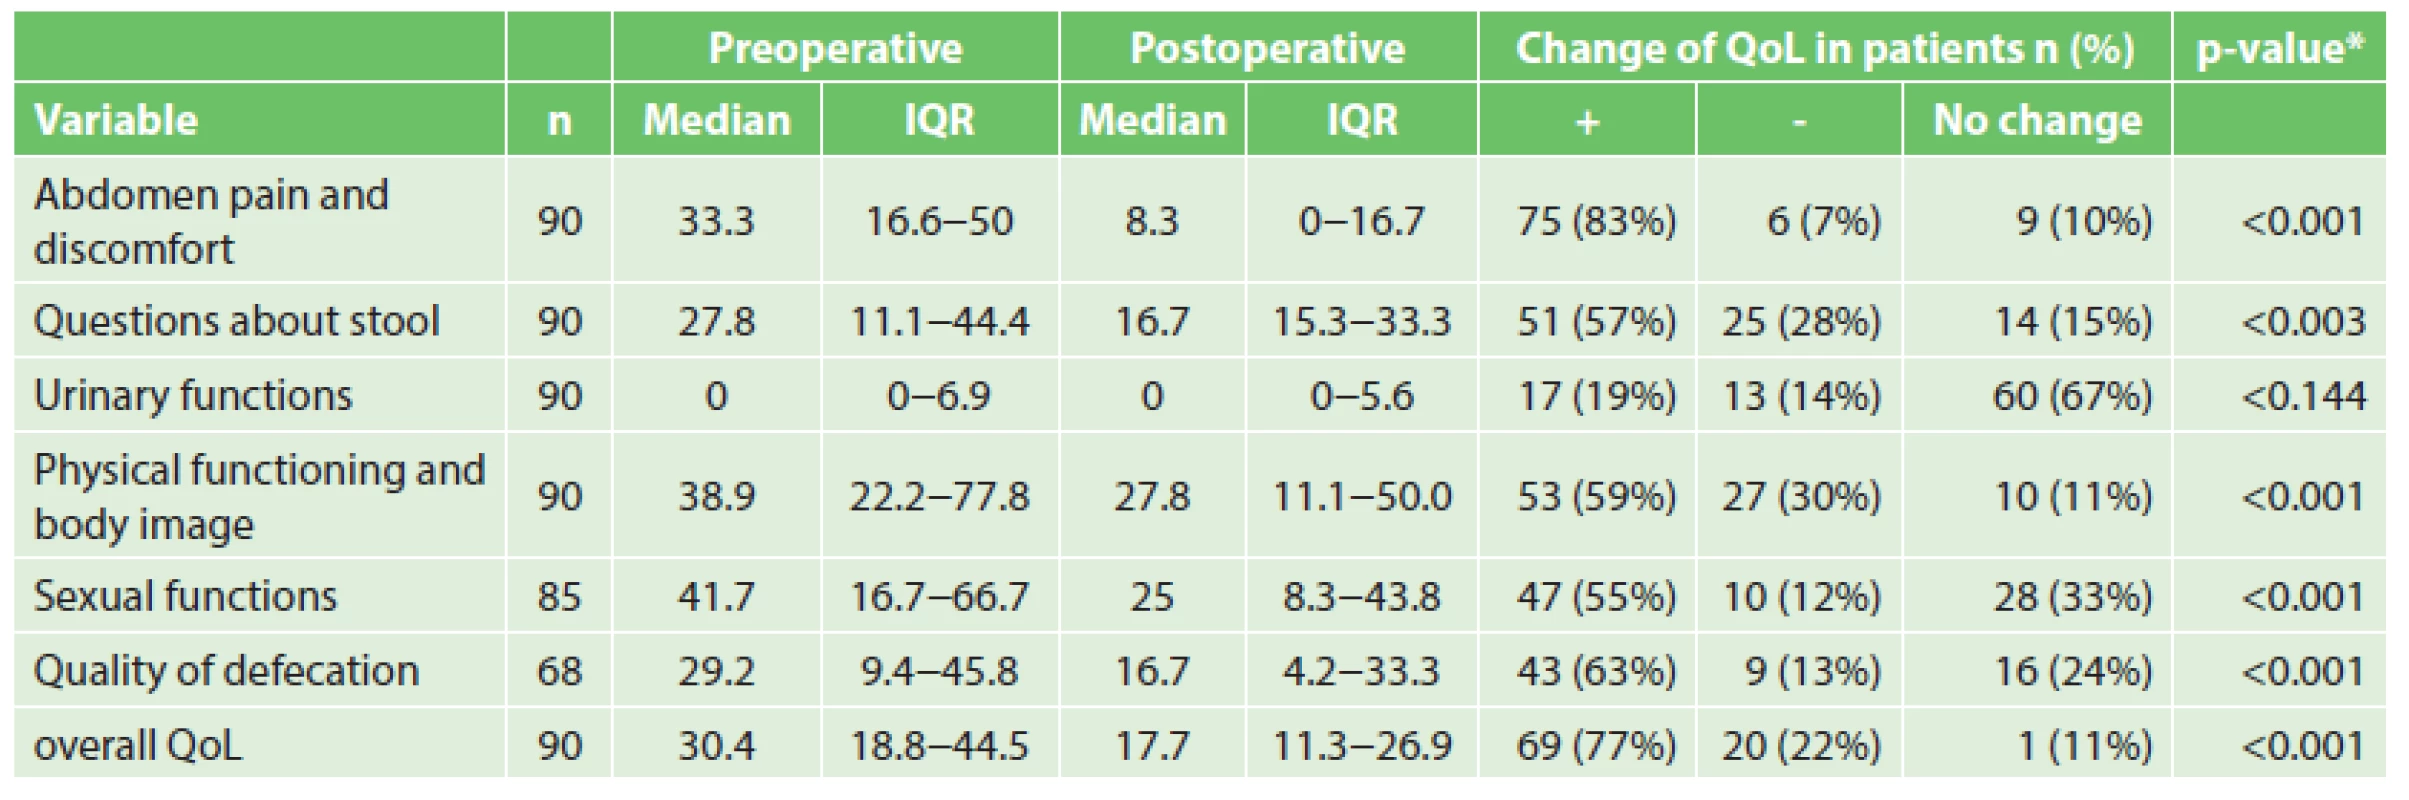 Preoperative and postoperative changes of QoL in patients after bowel resection for Crohn´s disease